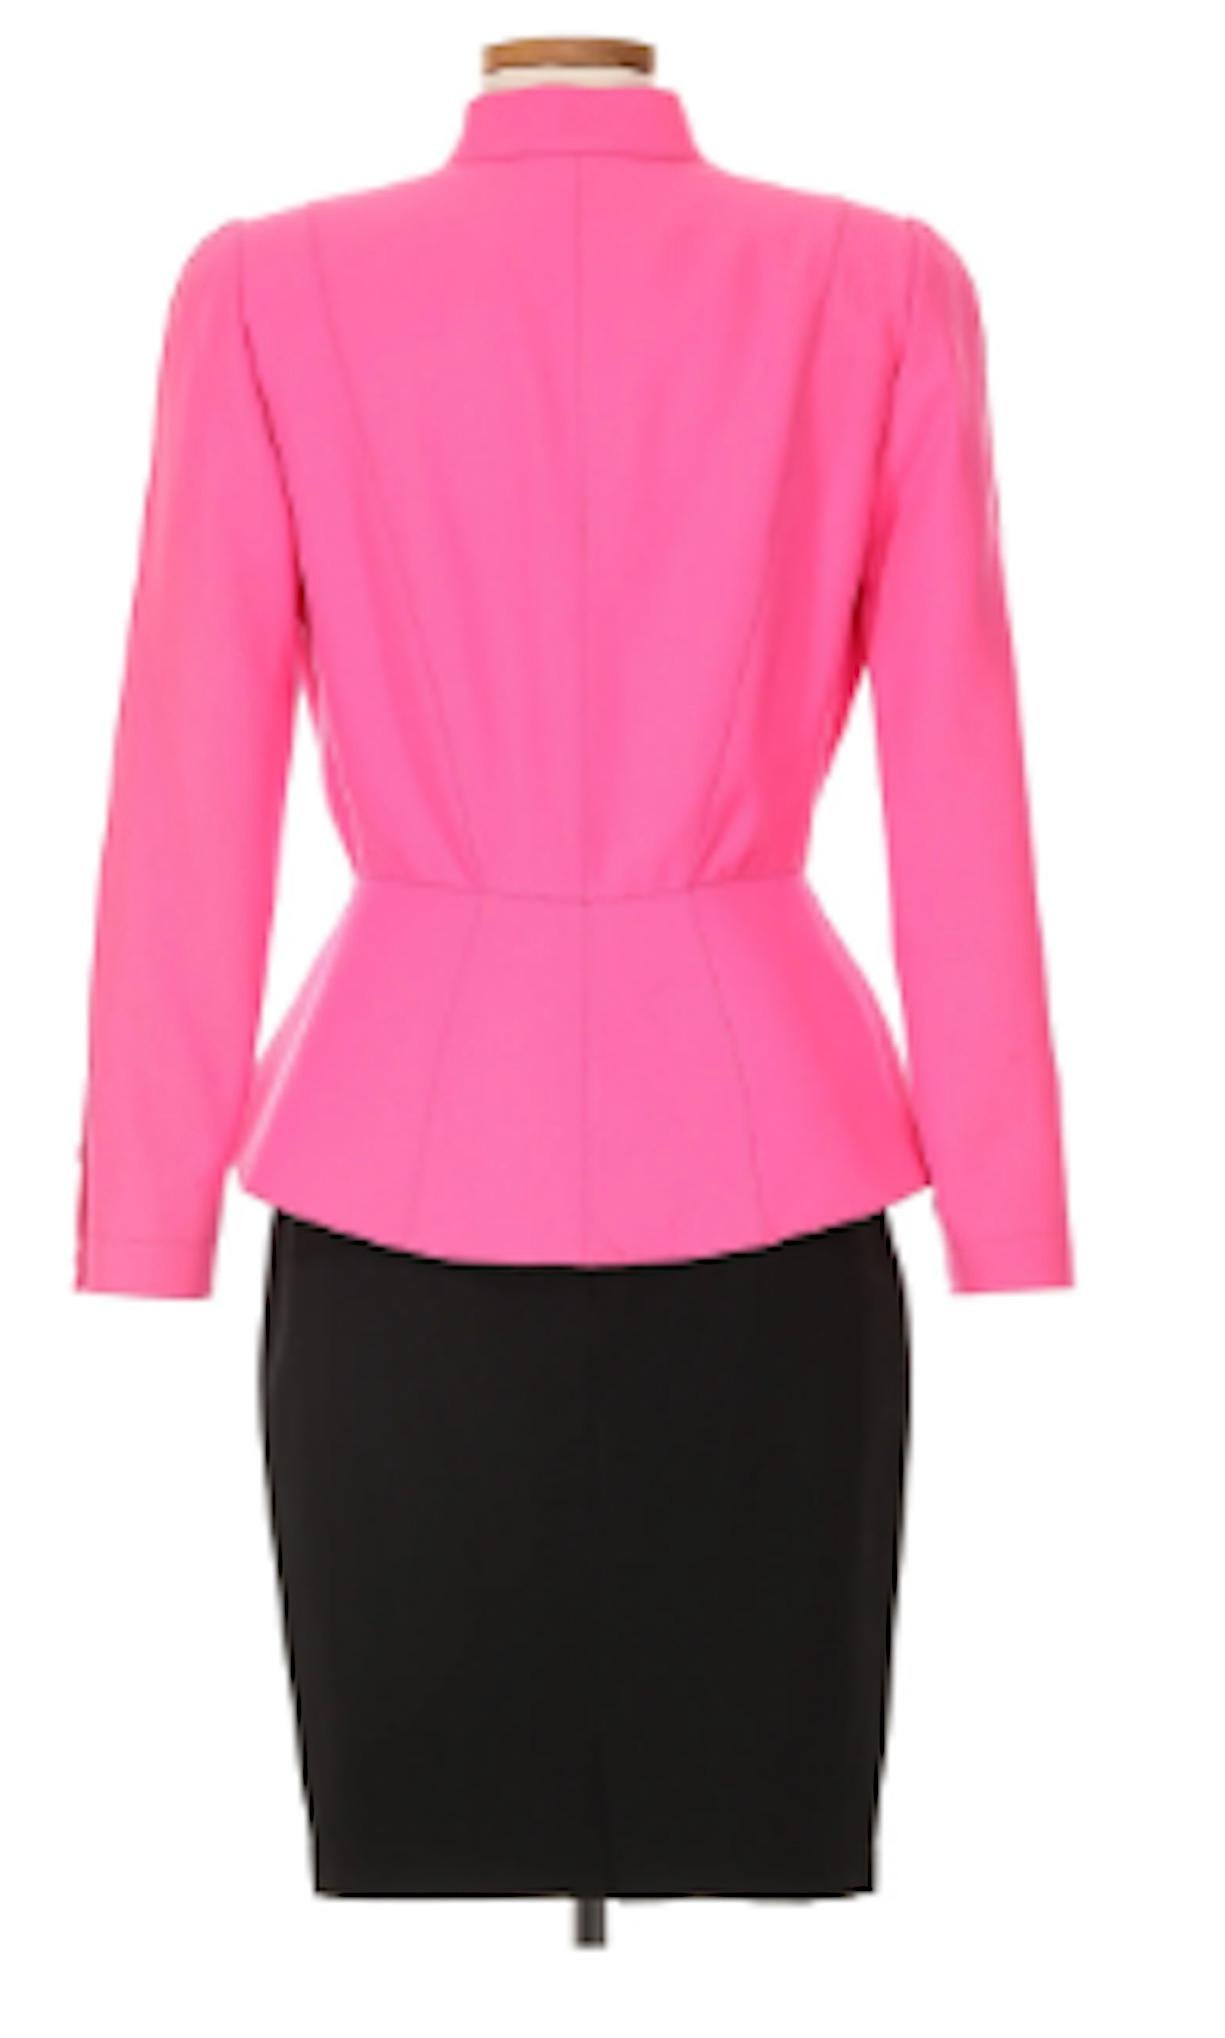 Thierry Mugler 1980s Shocking Pink Skirt Suit  In Excellent Condition For Sale In New York, NY